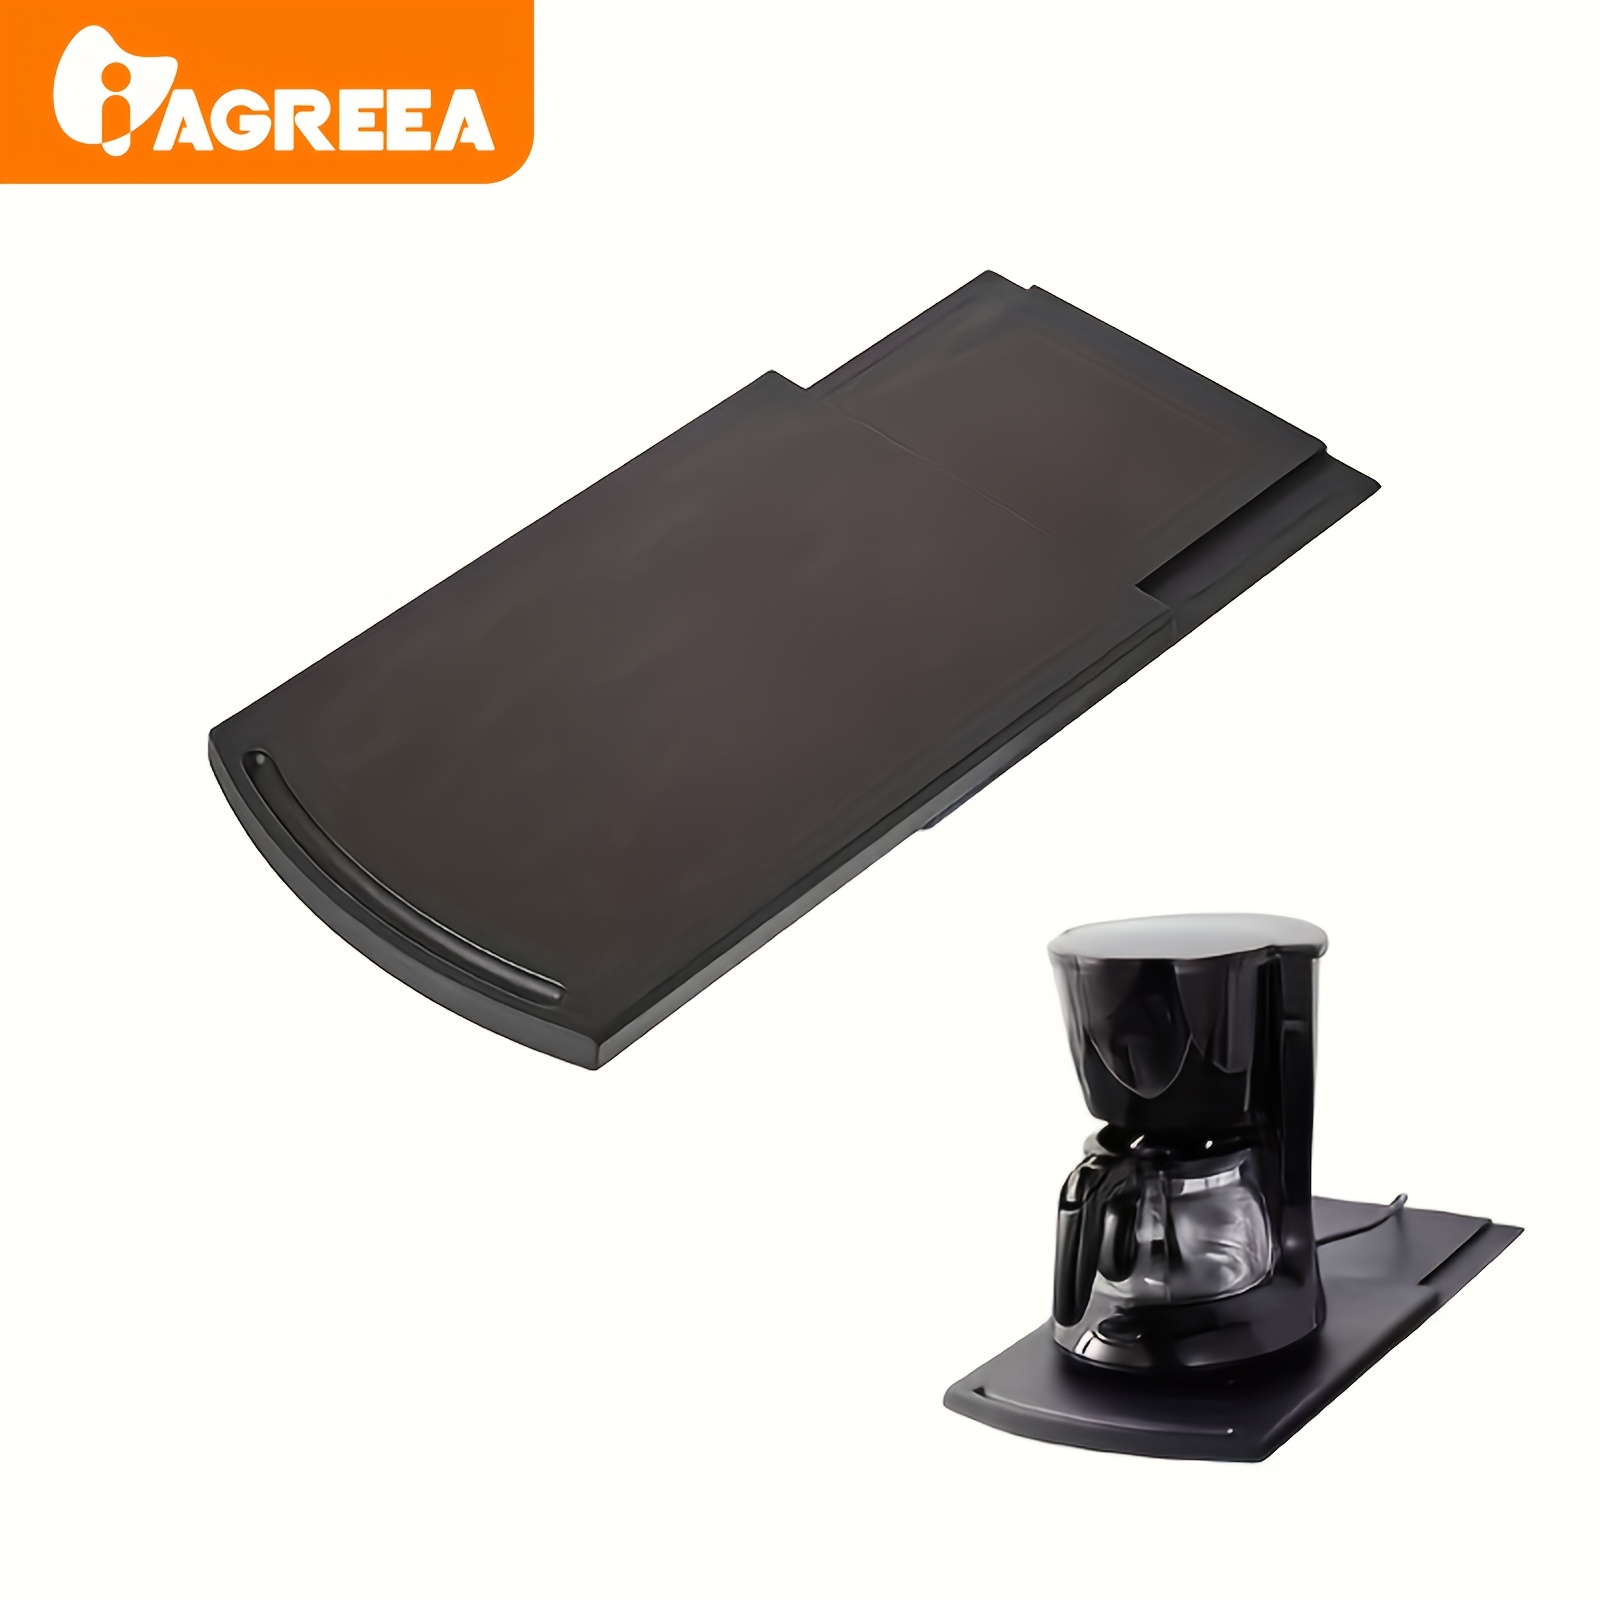  Mixer Sliding Tray for Kitchenaid 4.5-5 Qt Tilt-head Stand Mixer  - Metal Rolling Tray Kitchen Countertop Appliance Slider Storage Moving  Caddy with Wheel for Kitchen Aid 4.5-5 Qt Mixer: Home 